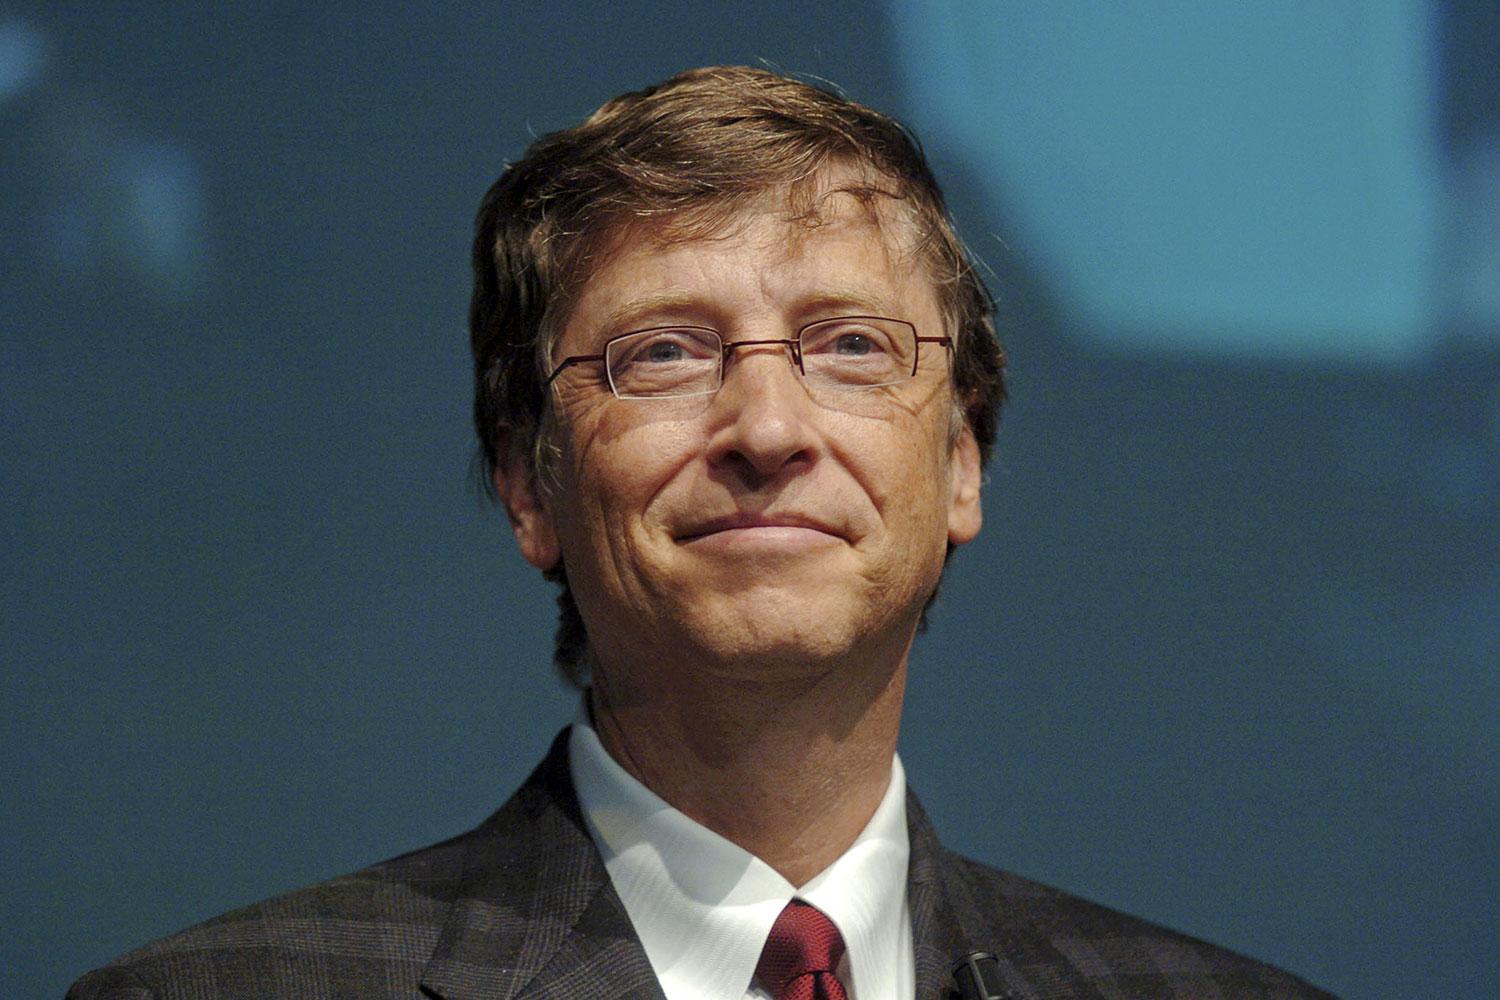 Bill Gates Launches $1 Billion Clean Energy Investment Fund